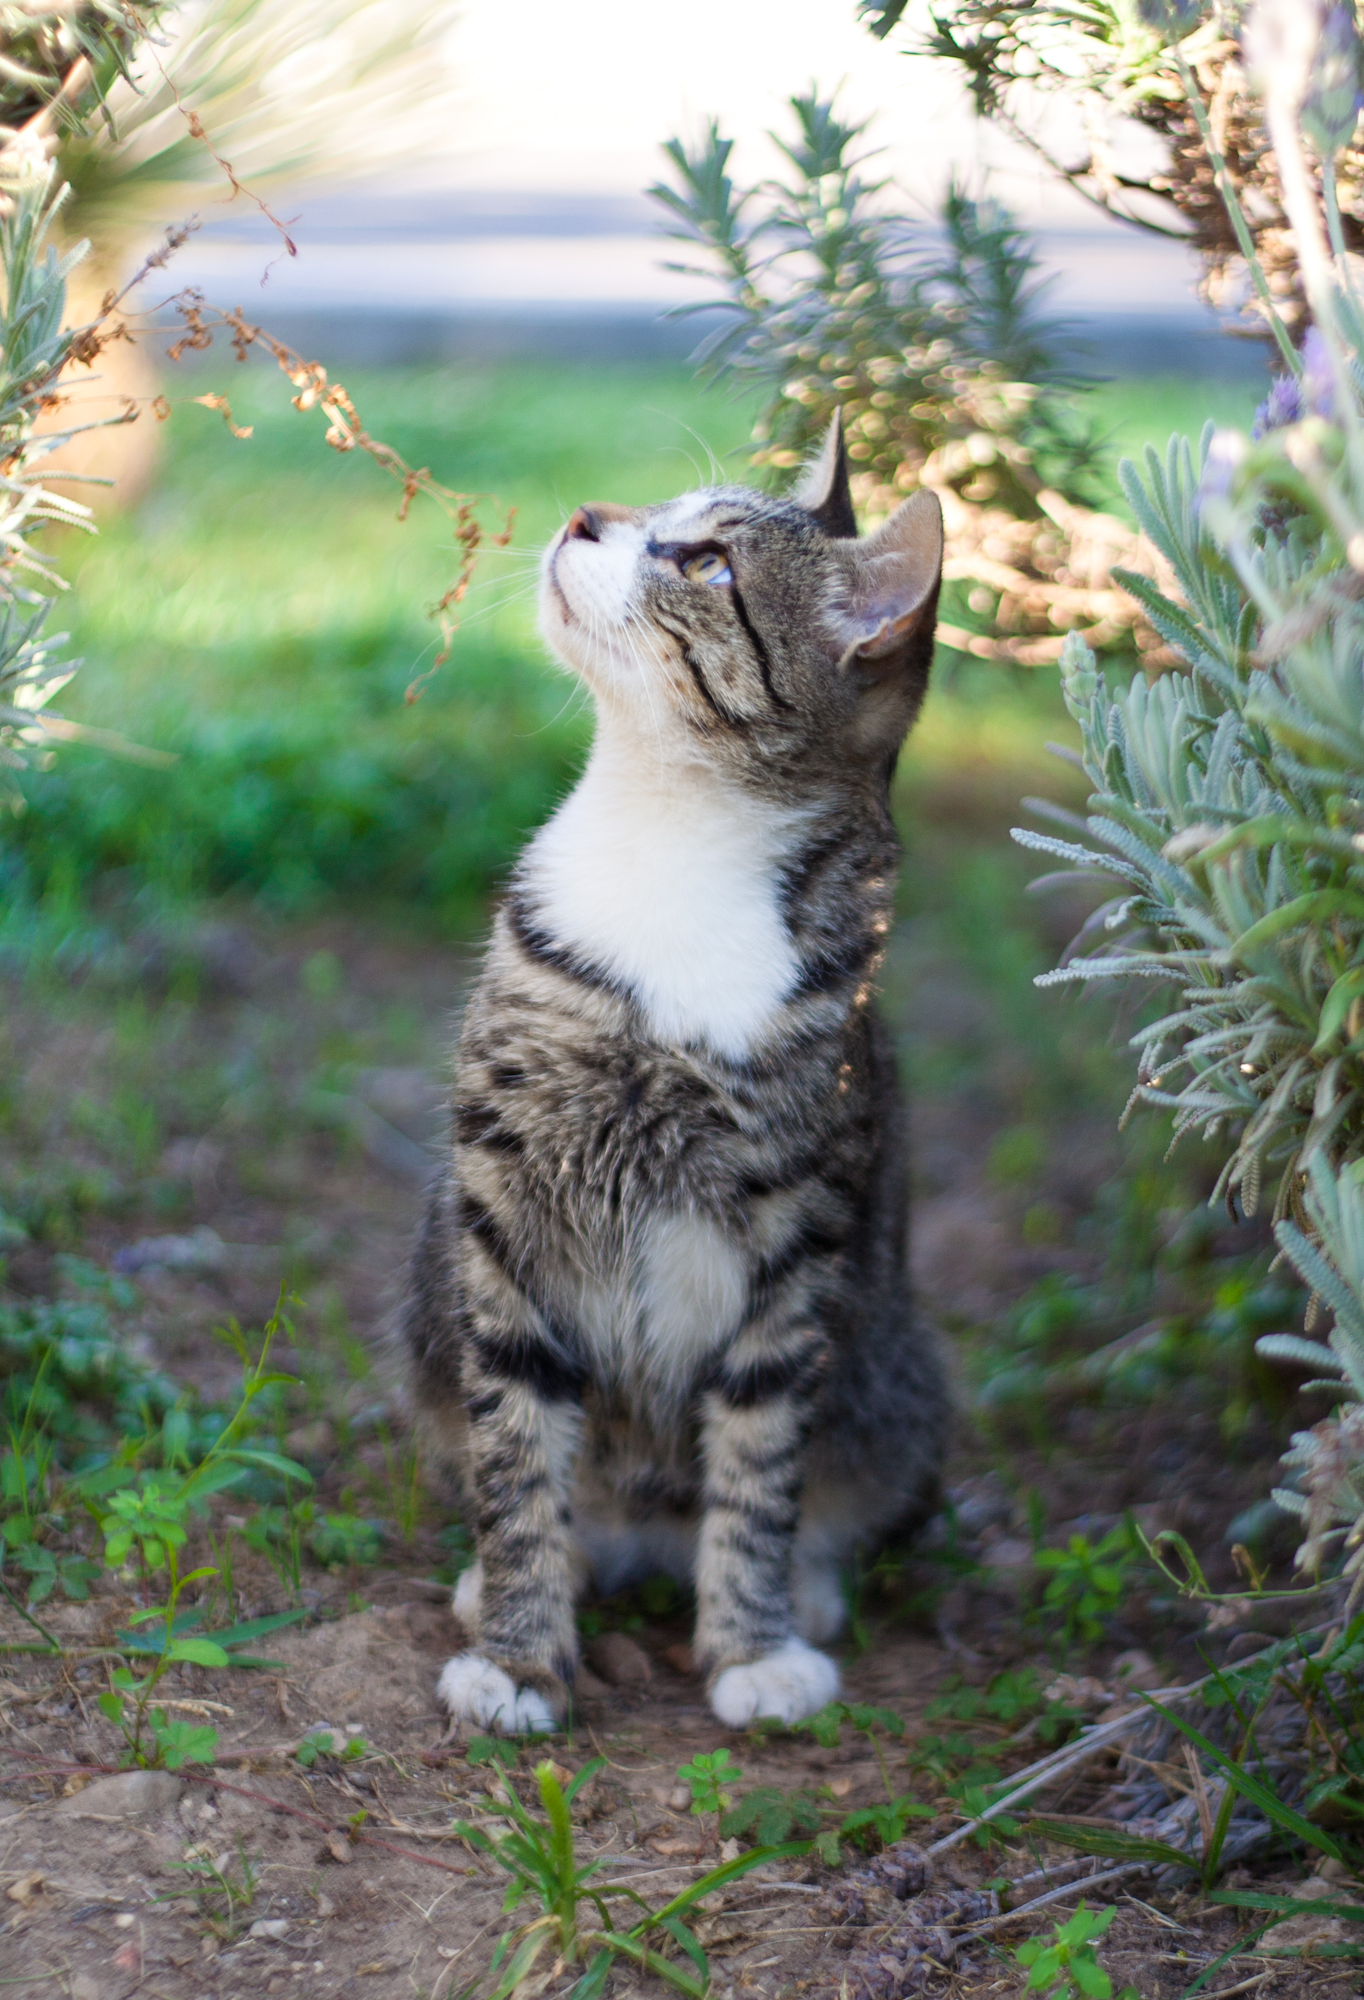 a cat looking up into the sky next to some plants